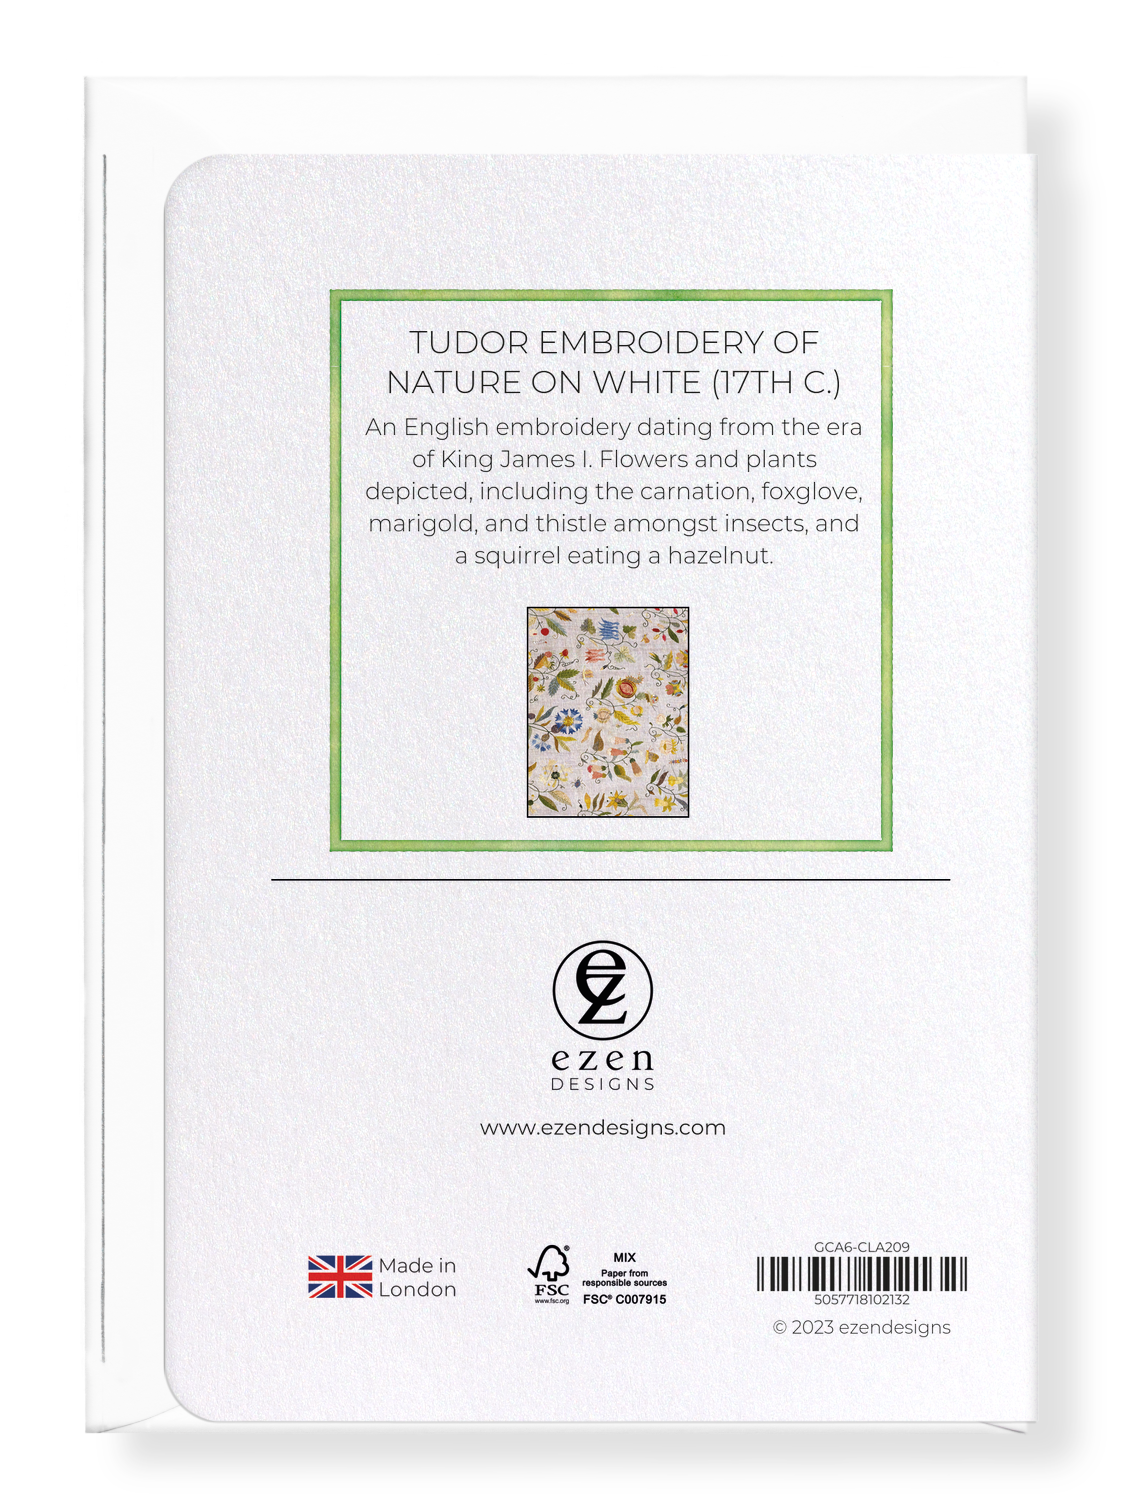 Ezen Designs - Tudor Embroidery of Nature on White (17th C.) - Greeting Card - Back